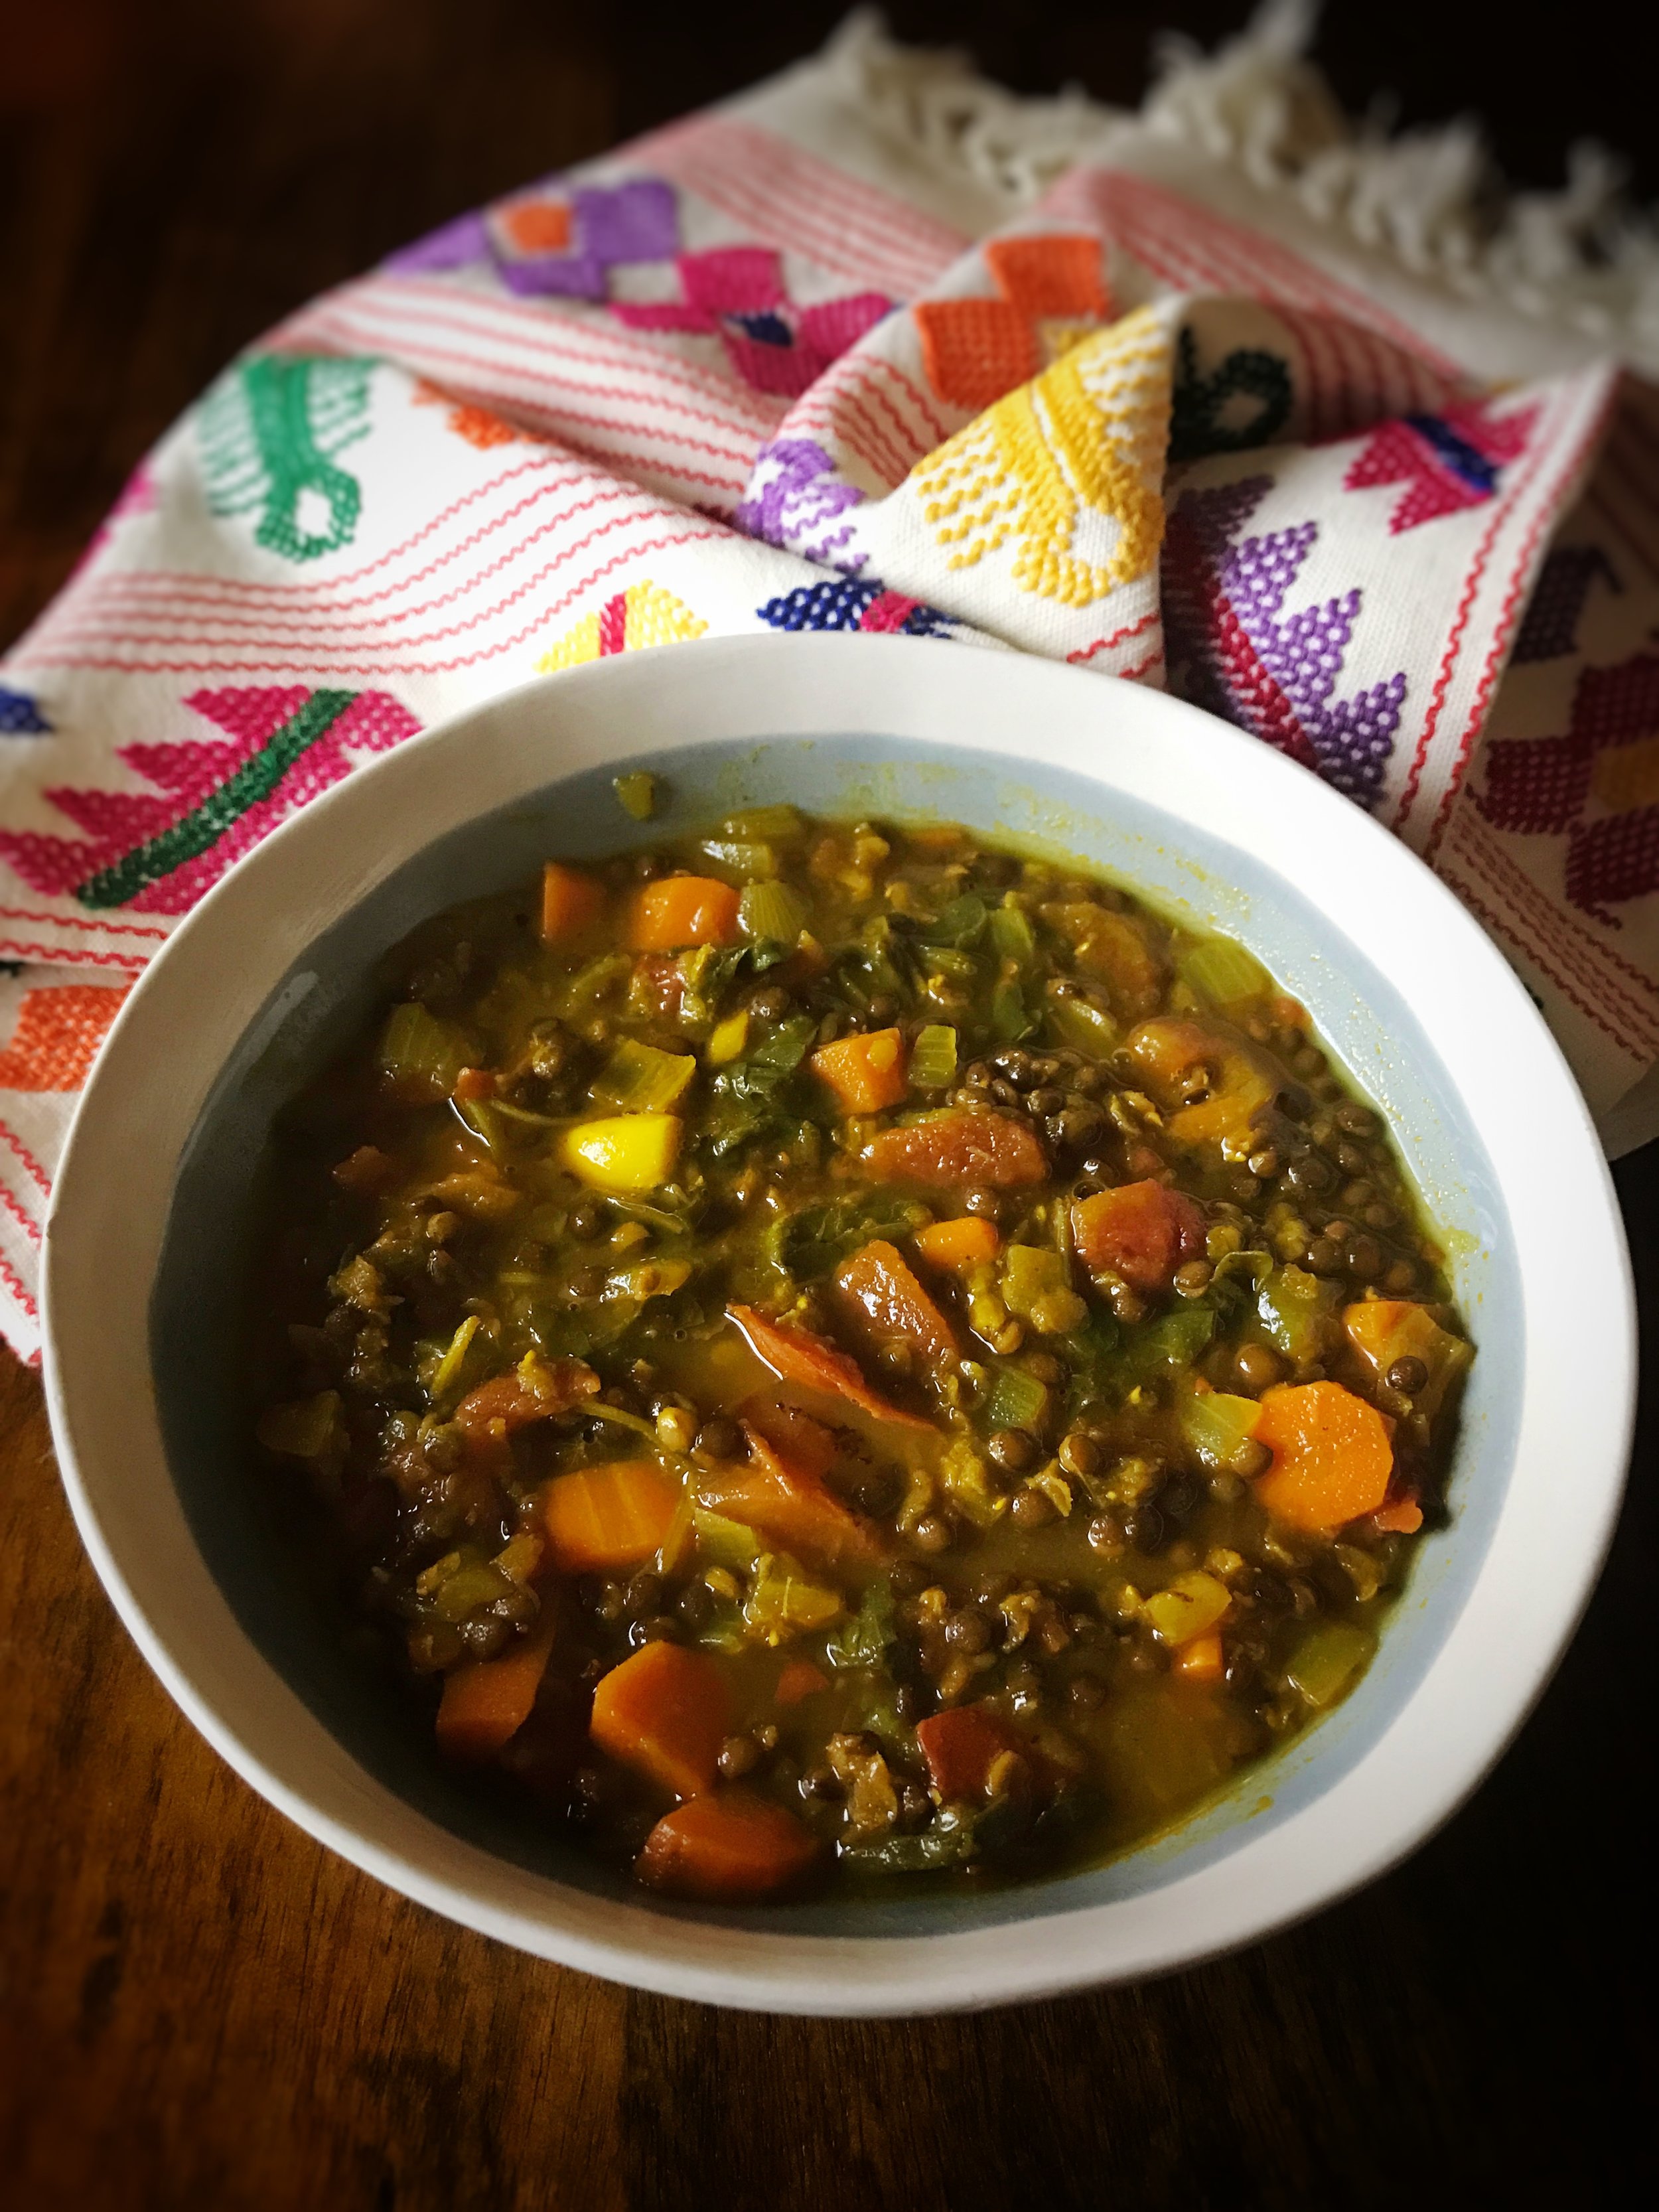 Gingery Lentil and Greens Soup